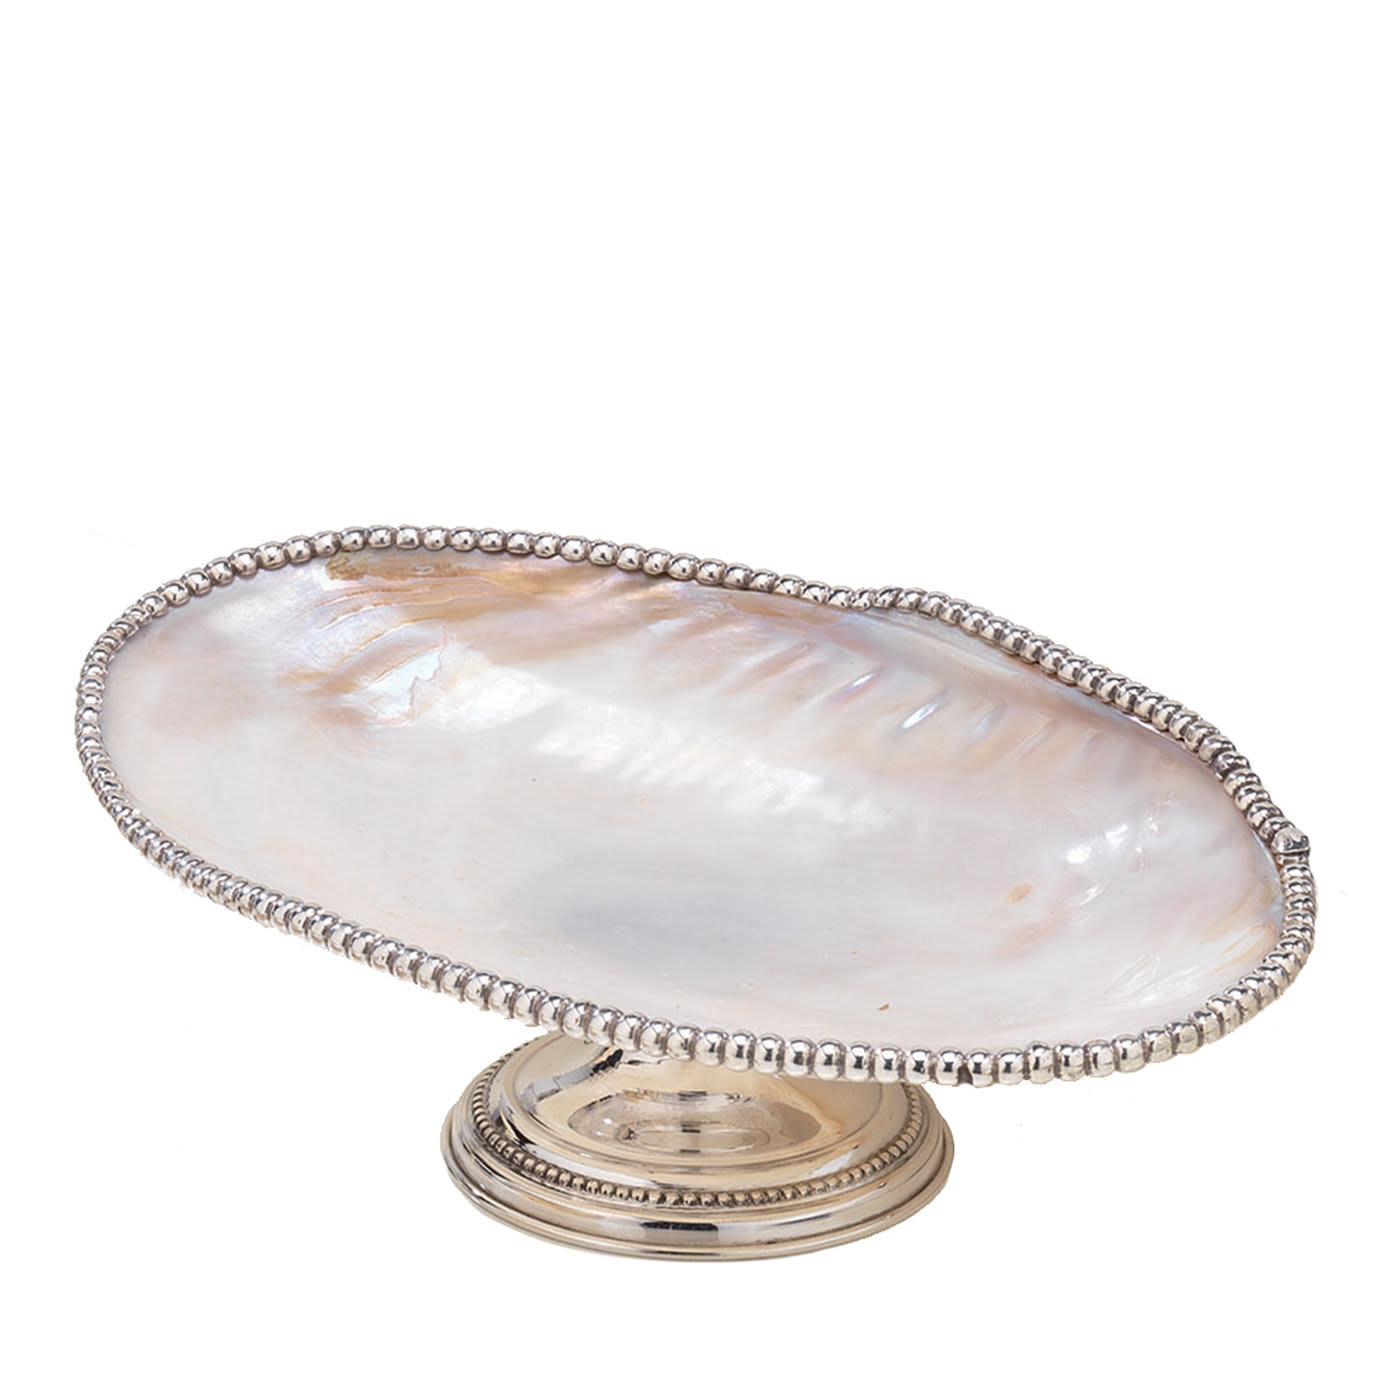 Small Smooth Mother of Pearl Cake Stand - L’argento Firenze